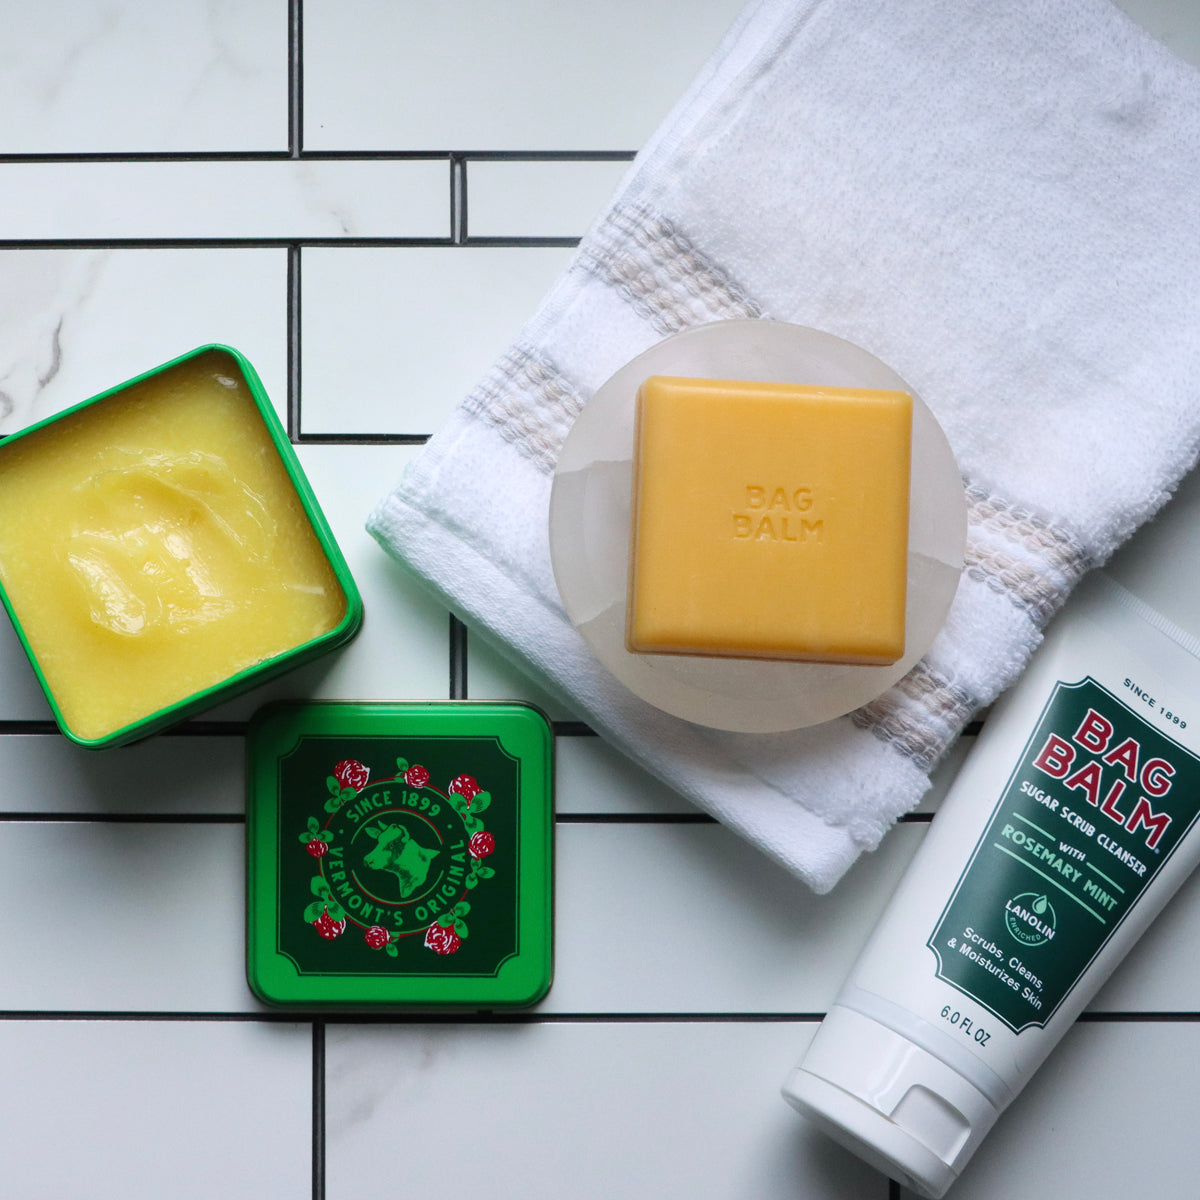 Bag Balm Vermont's Original Solid Balm Stick with Aloe Vera, Body Balm  Stick for Dry Skin, Chafing, Skin Irritations & More - Cuticle Balm Stick